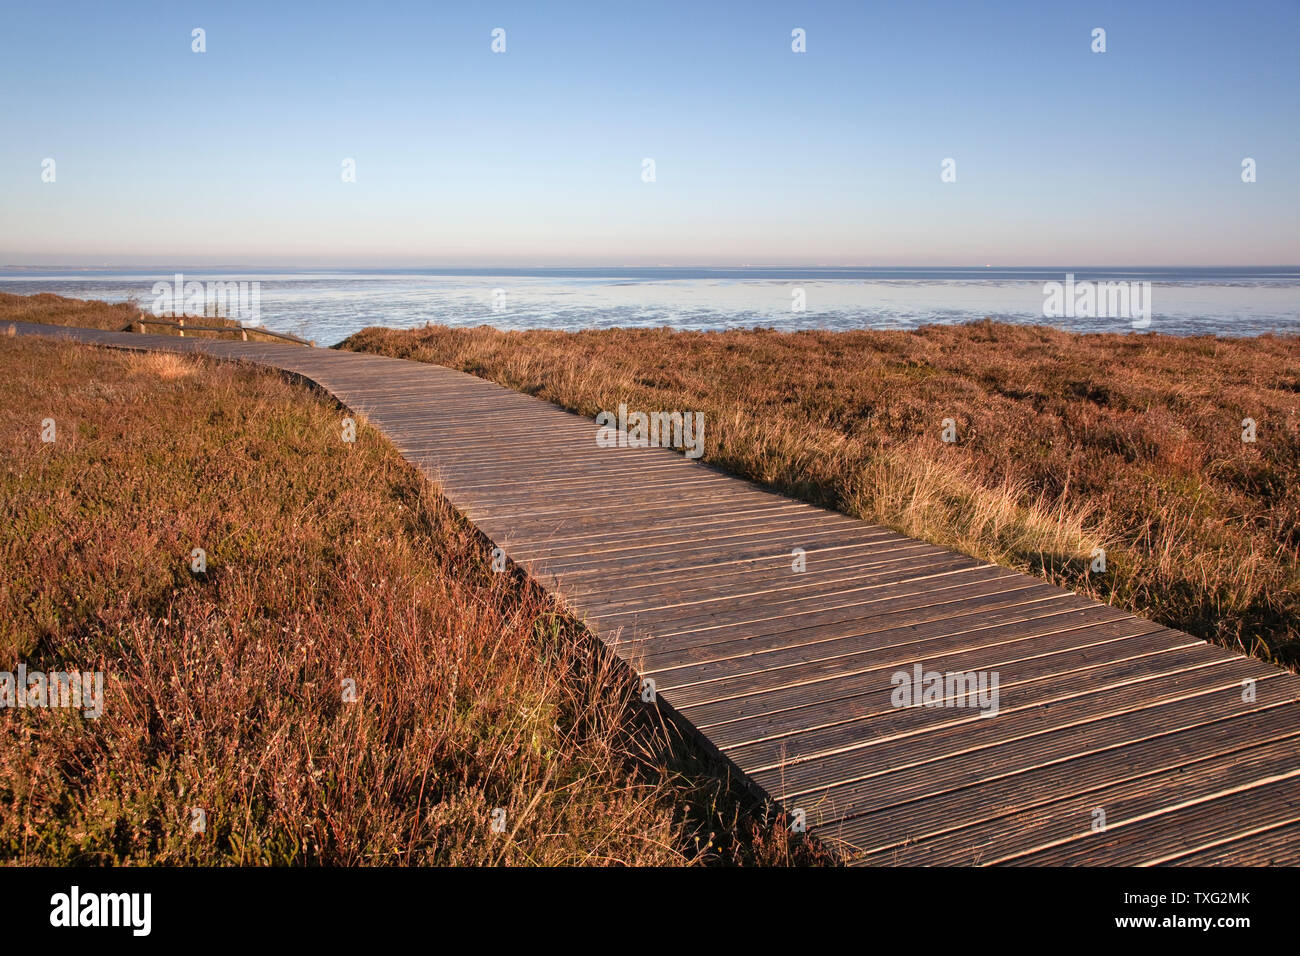 geography / travel, Germany, Schleswig-Holstein, way by means of the heath to the mud flats at Morsum , Additional-Rights-Clearance-Info-Not-Available Stock Photo